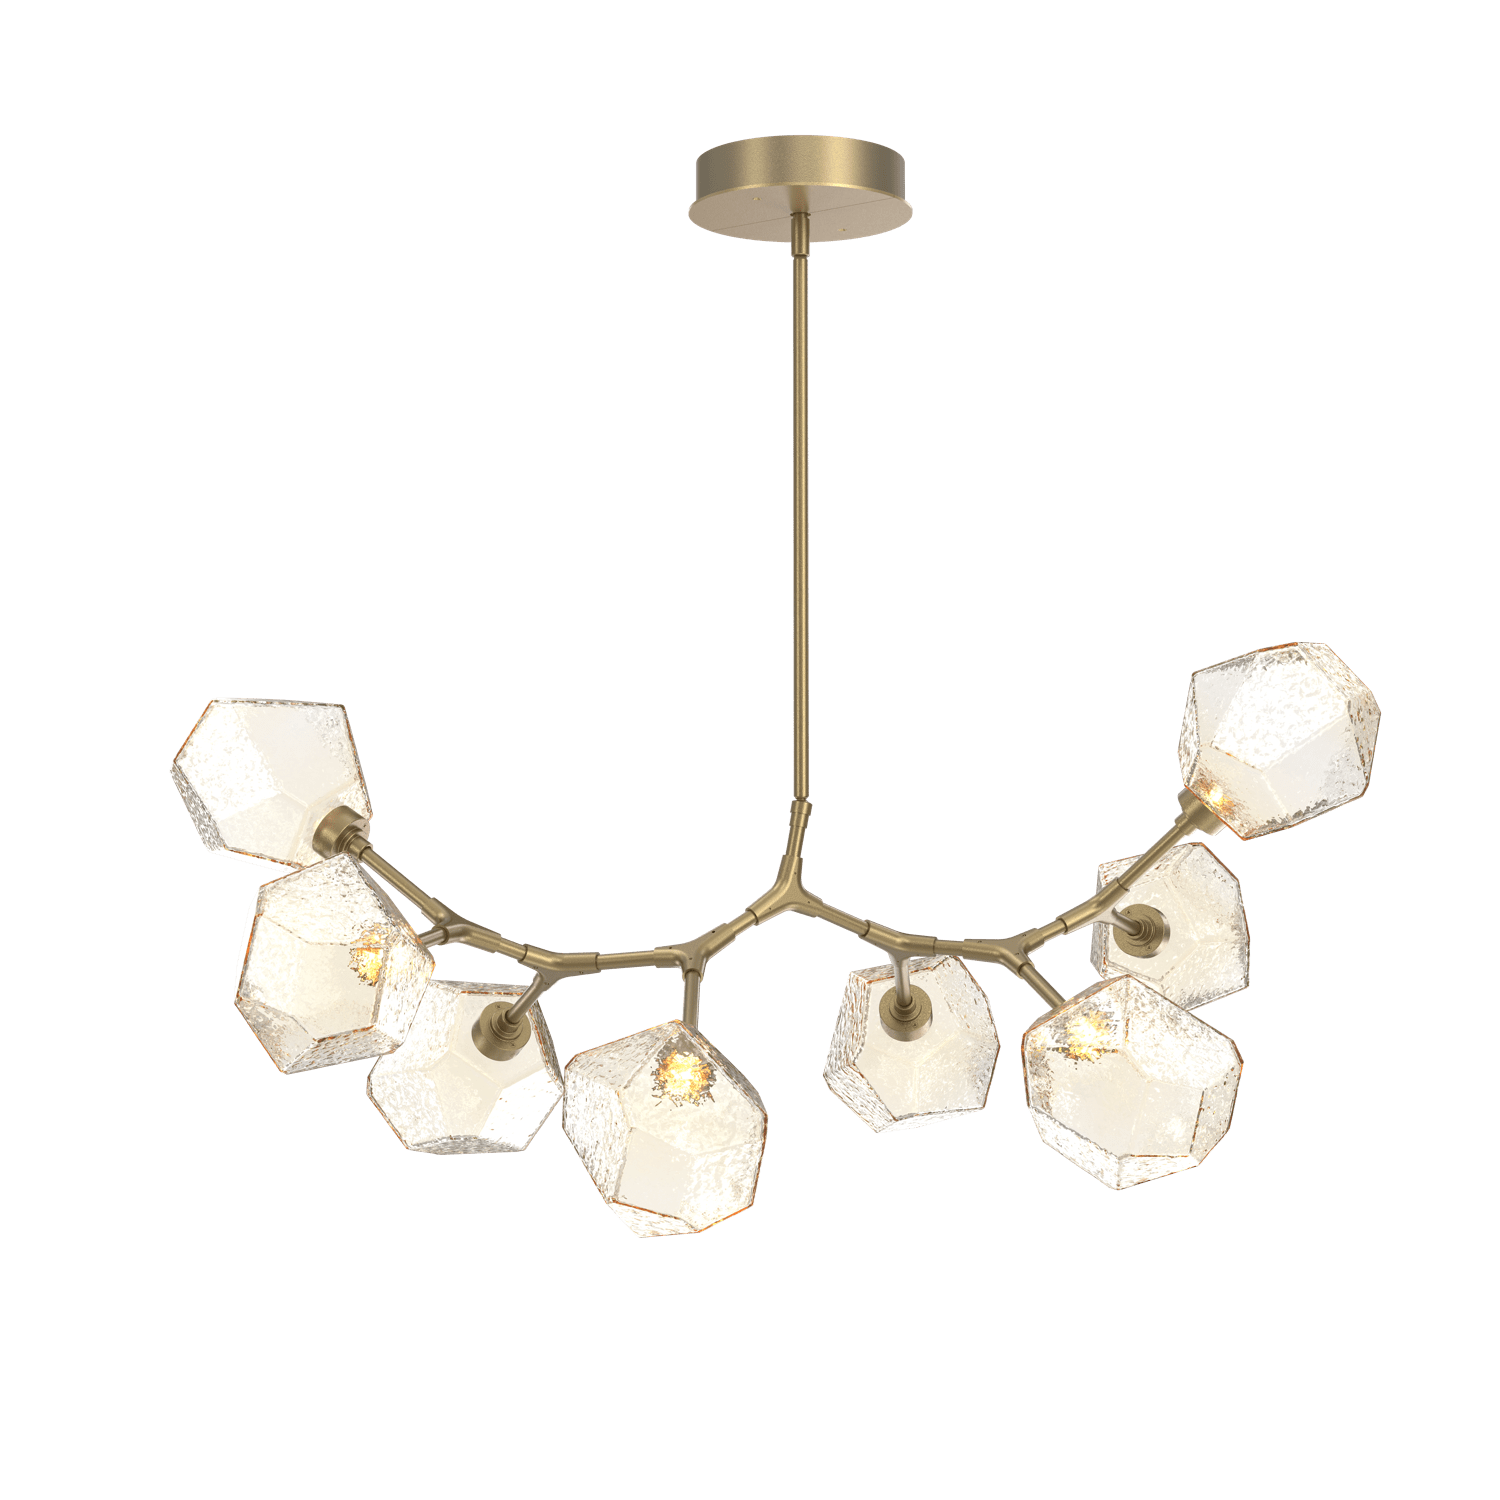 PLB0039-BB-GB-A-Hammerton-Studio-Gem-8-light-modern-branch-chandelier-with-gilded-brass-finish-and-amber-blown-glass-shades-and-LED-lamping